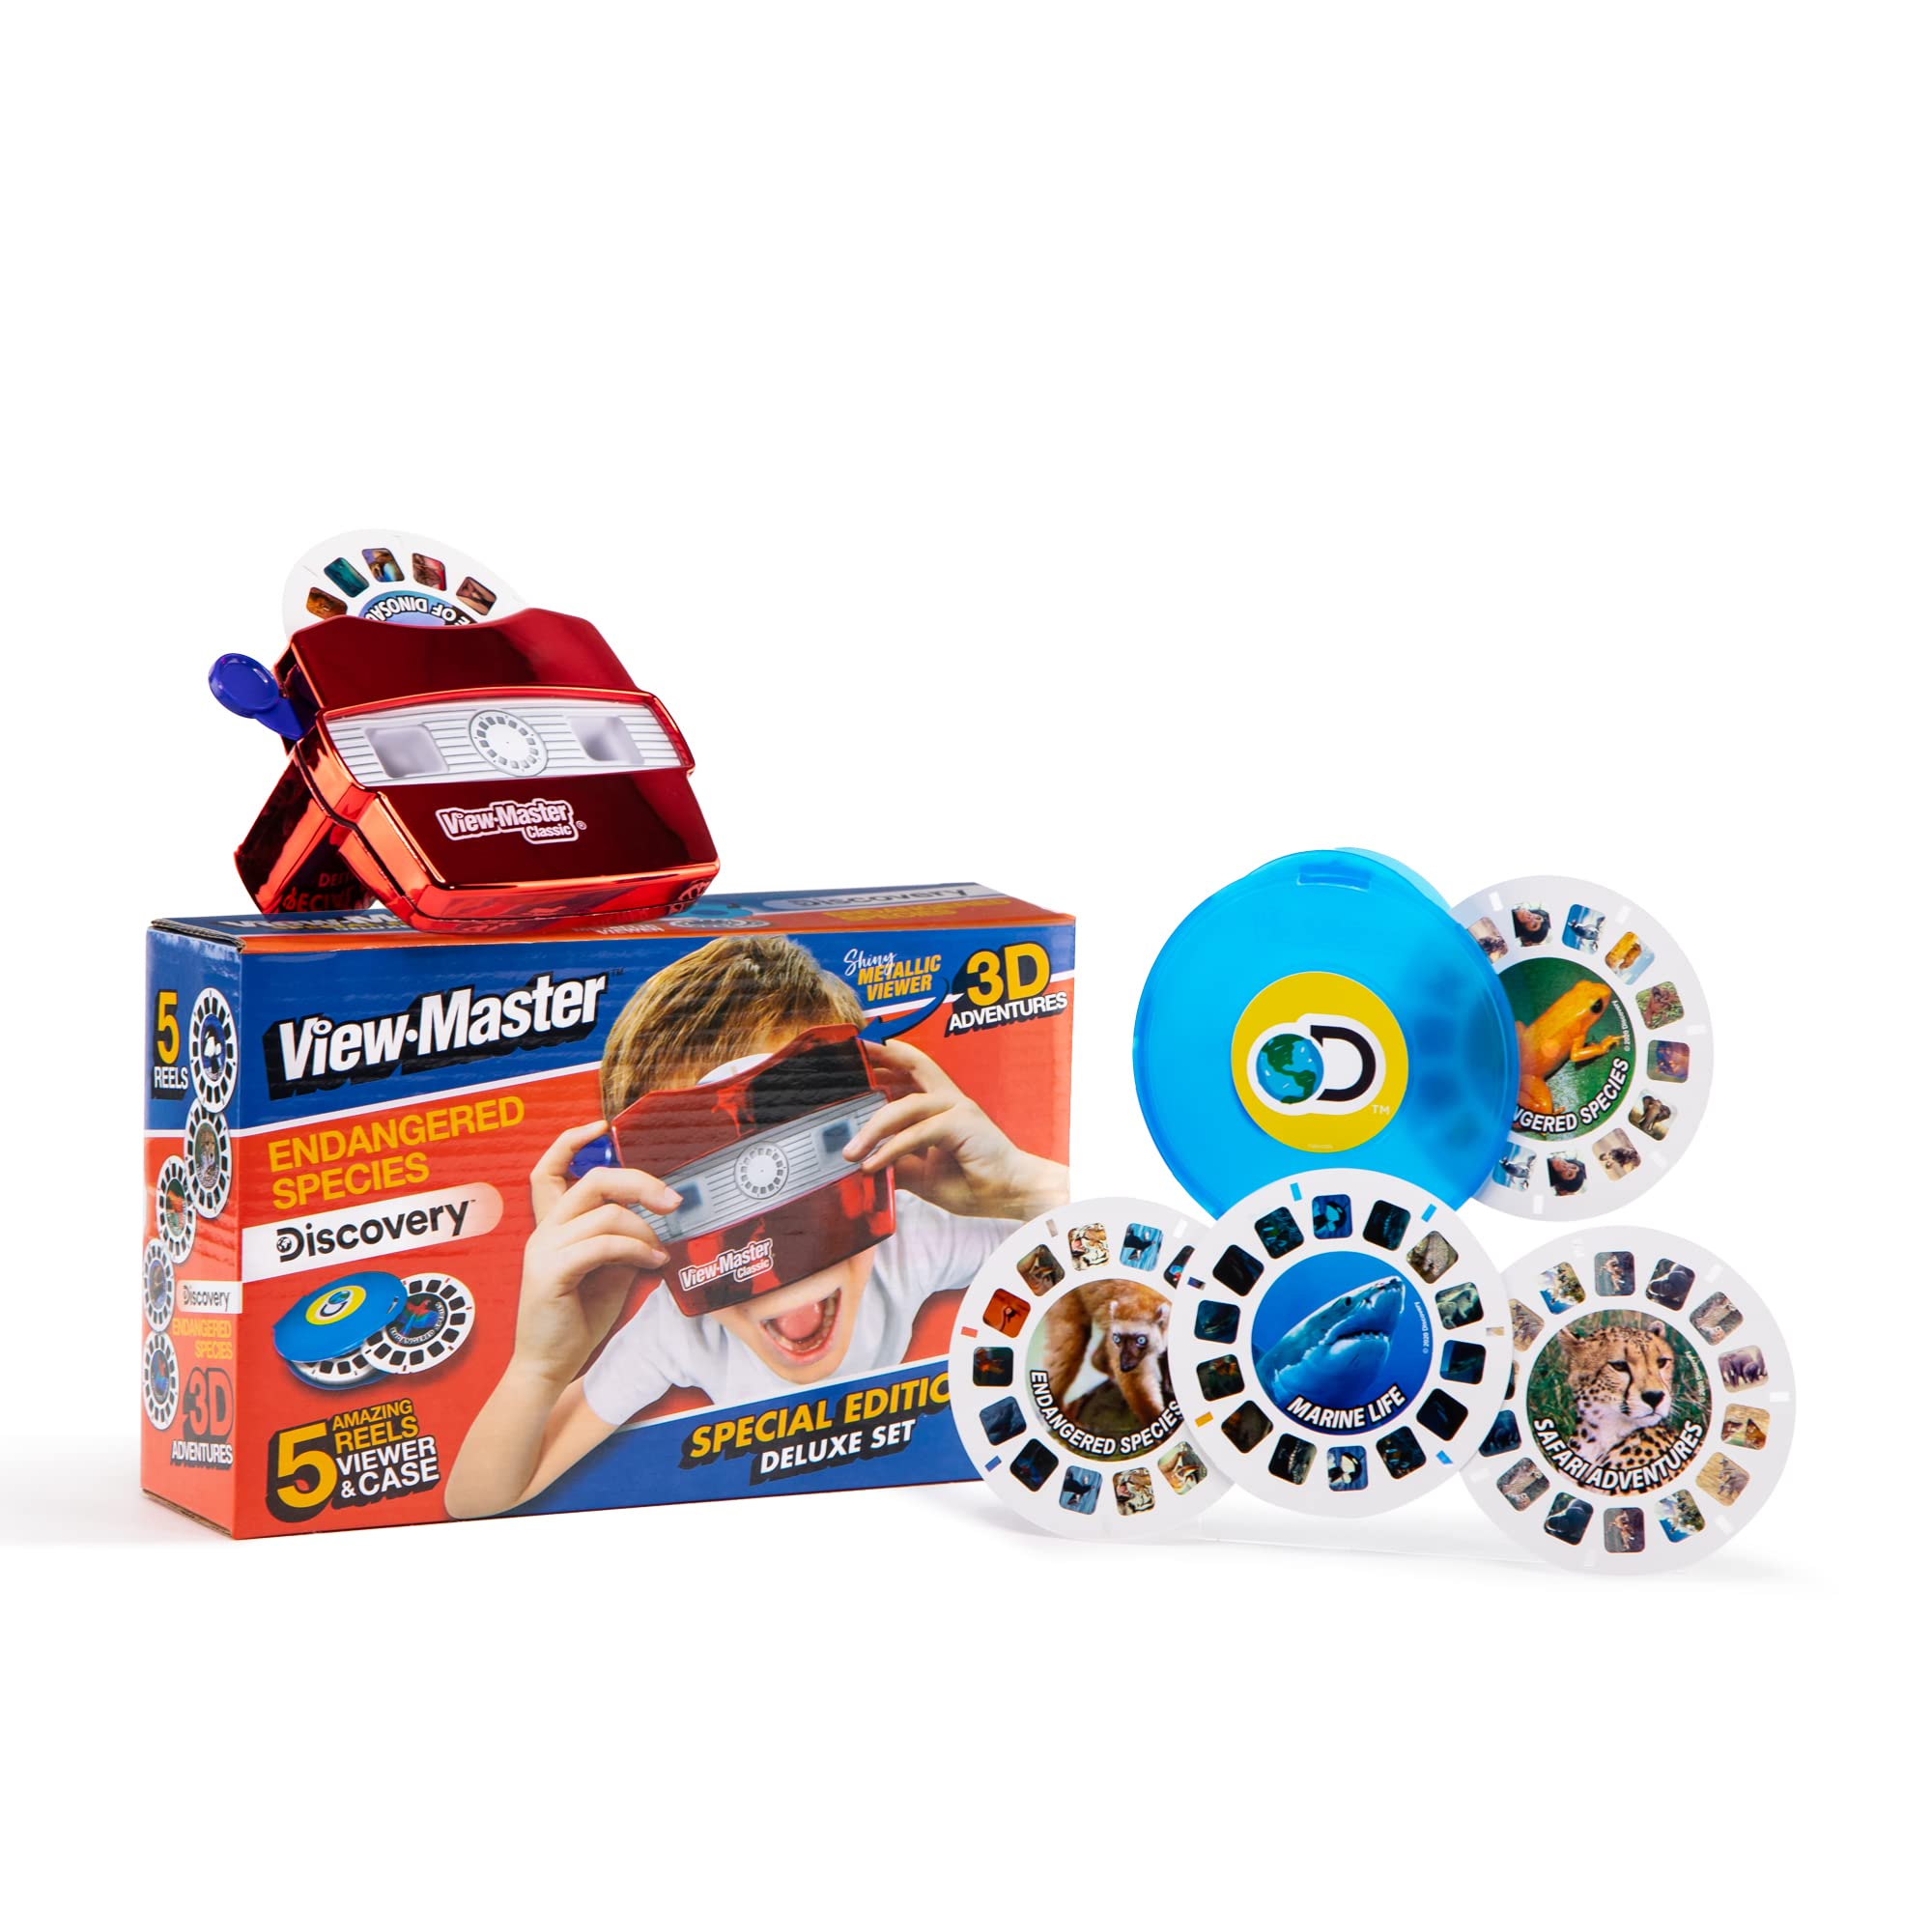 View-Master View Master classic Deluxe Edition with Discovery Kids